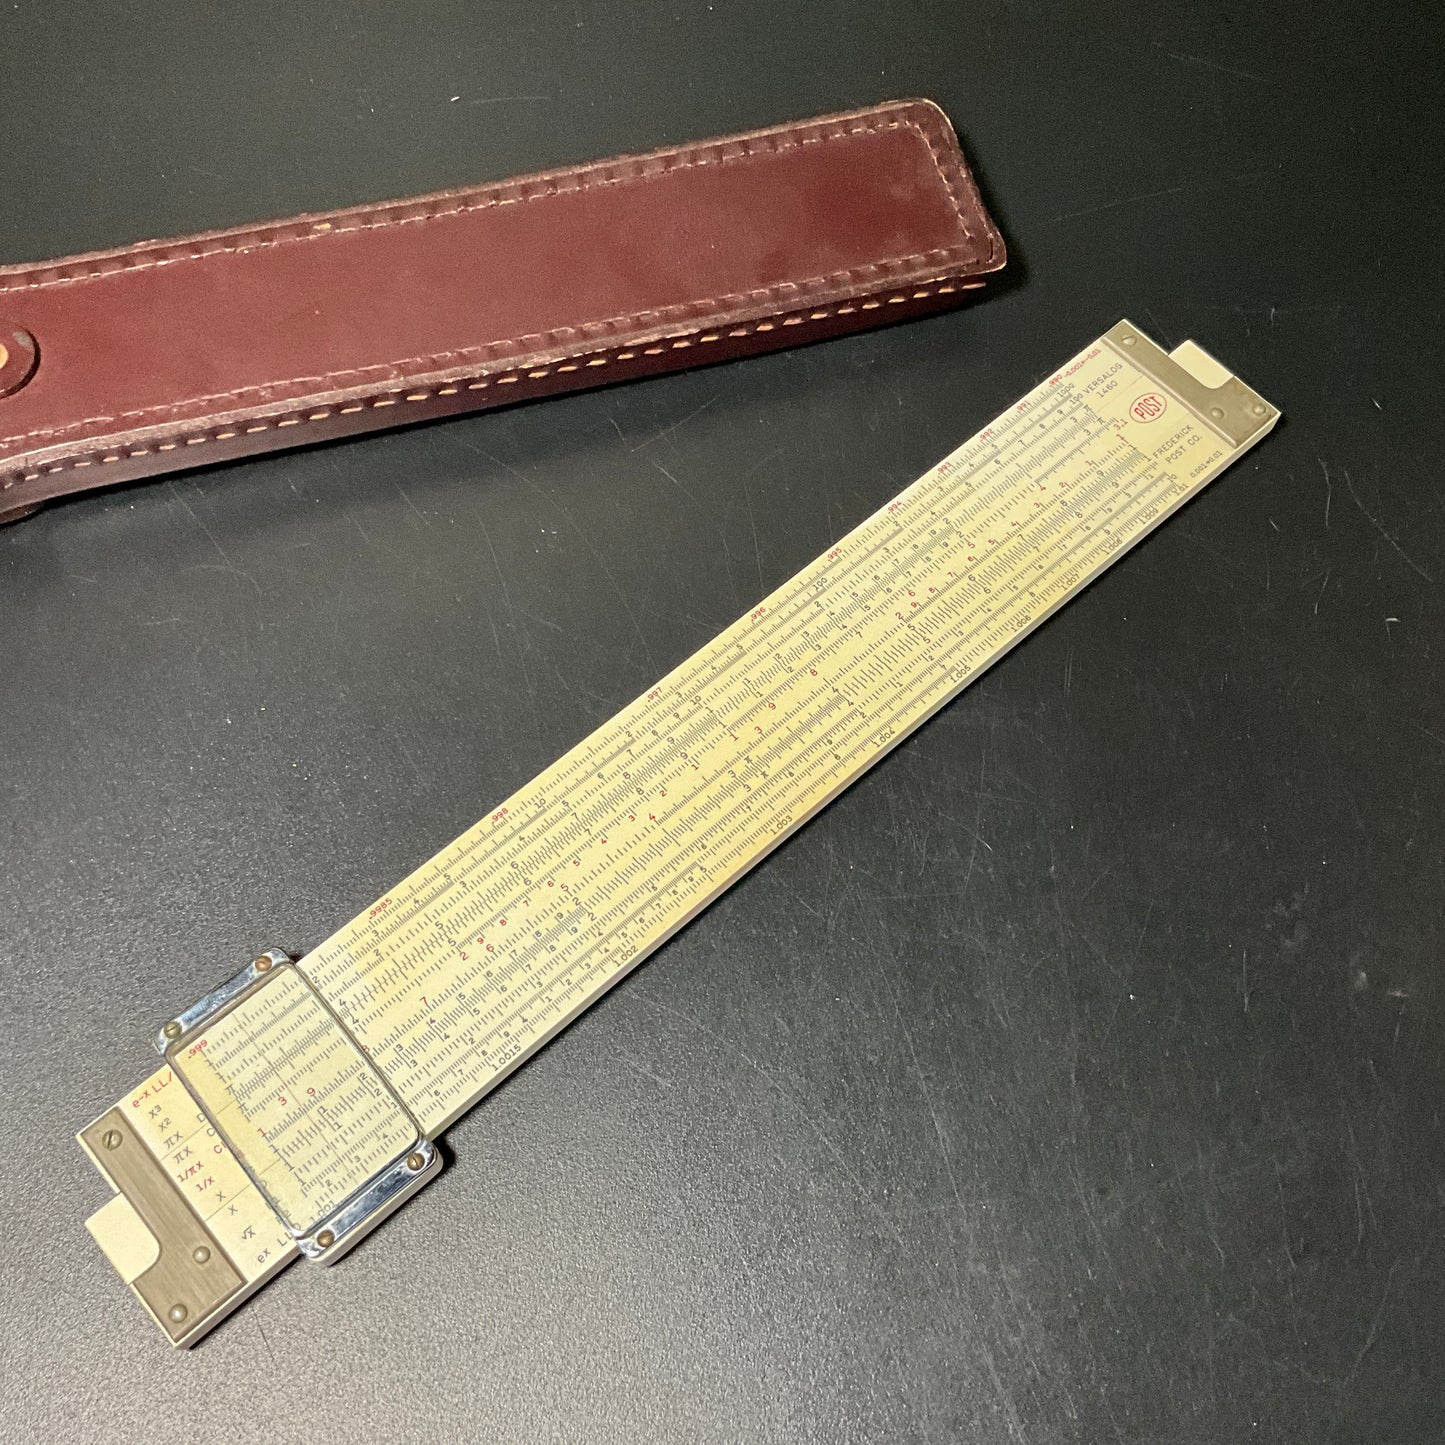 Fantastic Frederick Post Co. Versalog 1460 slide rule with stitched leather case vintage collectible tool